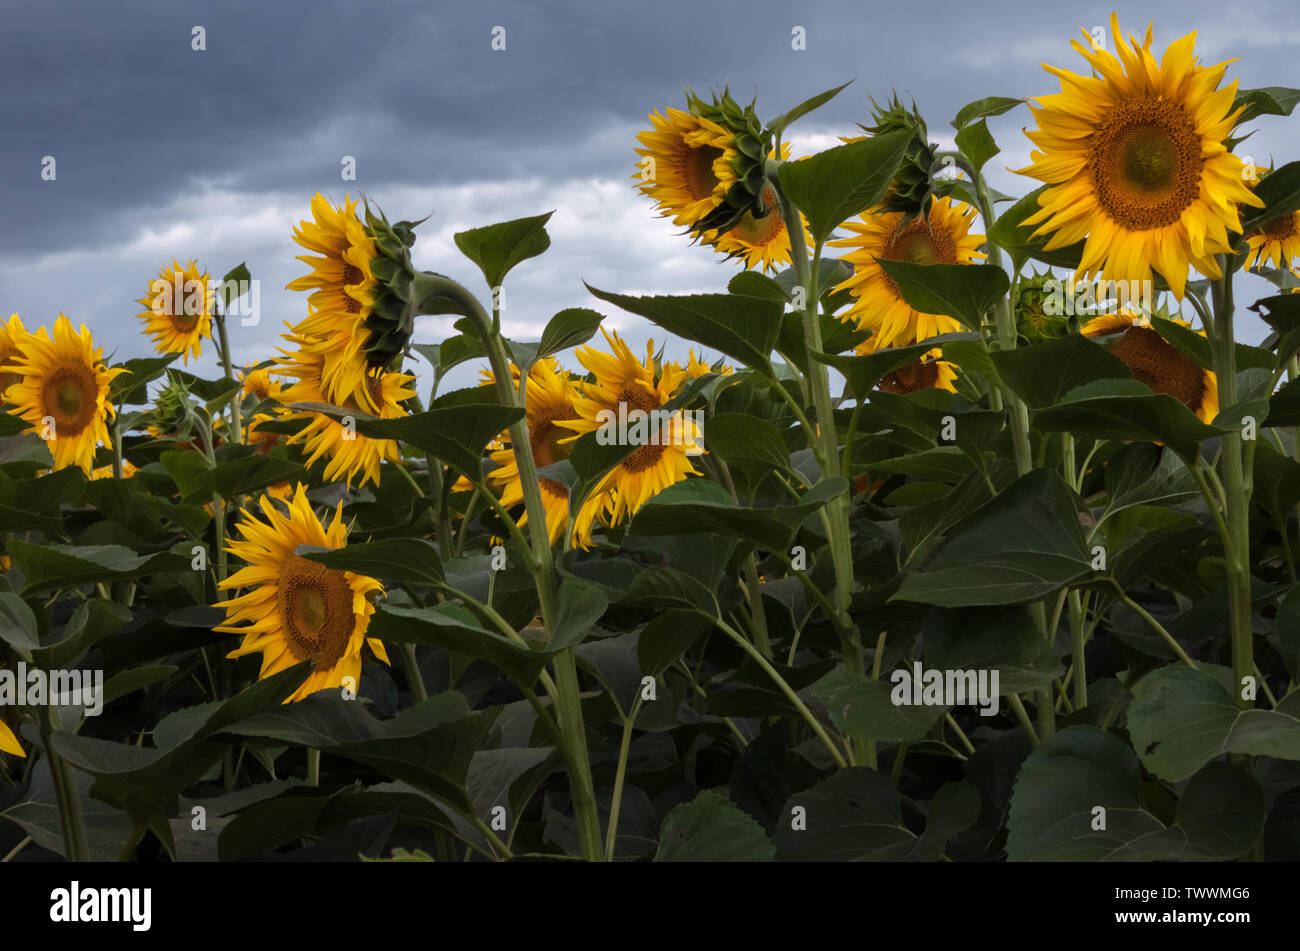 Sunflowers on a windy day with stormy sky in background Stock Photo